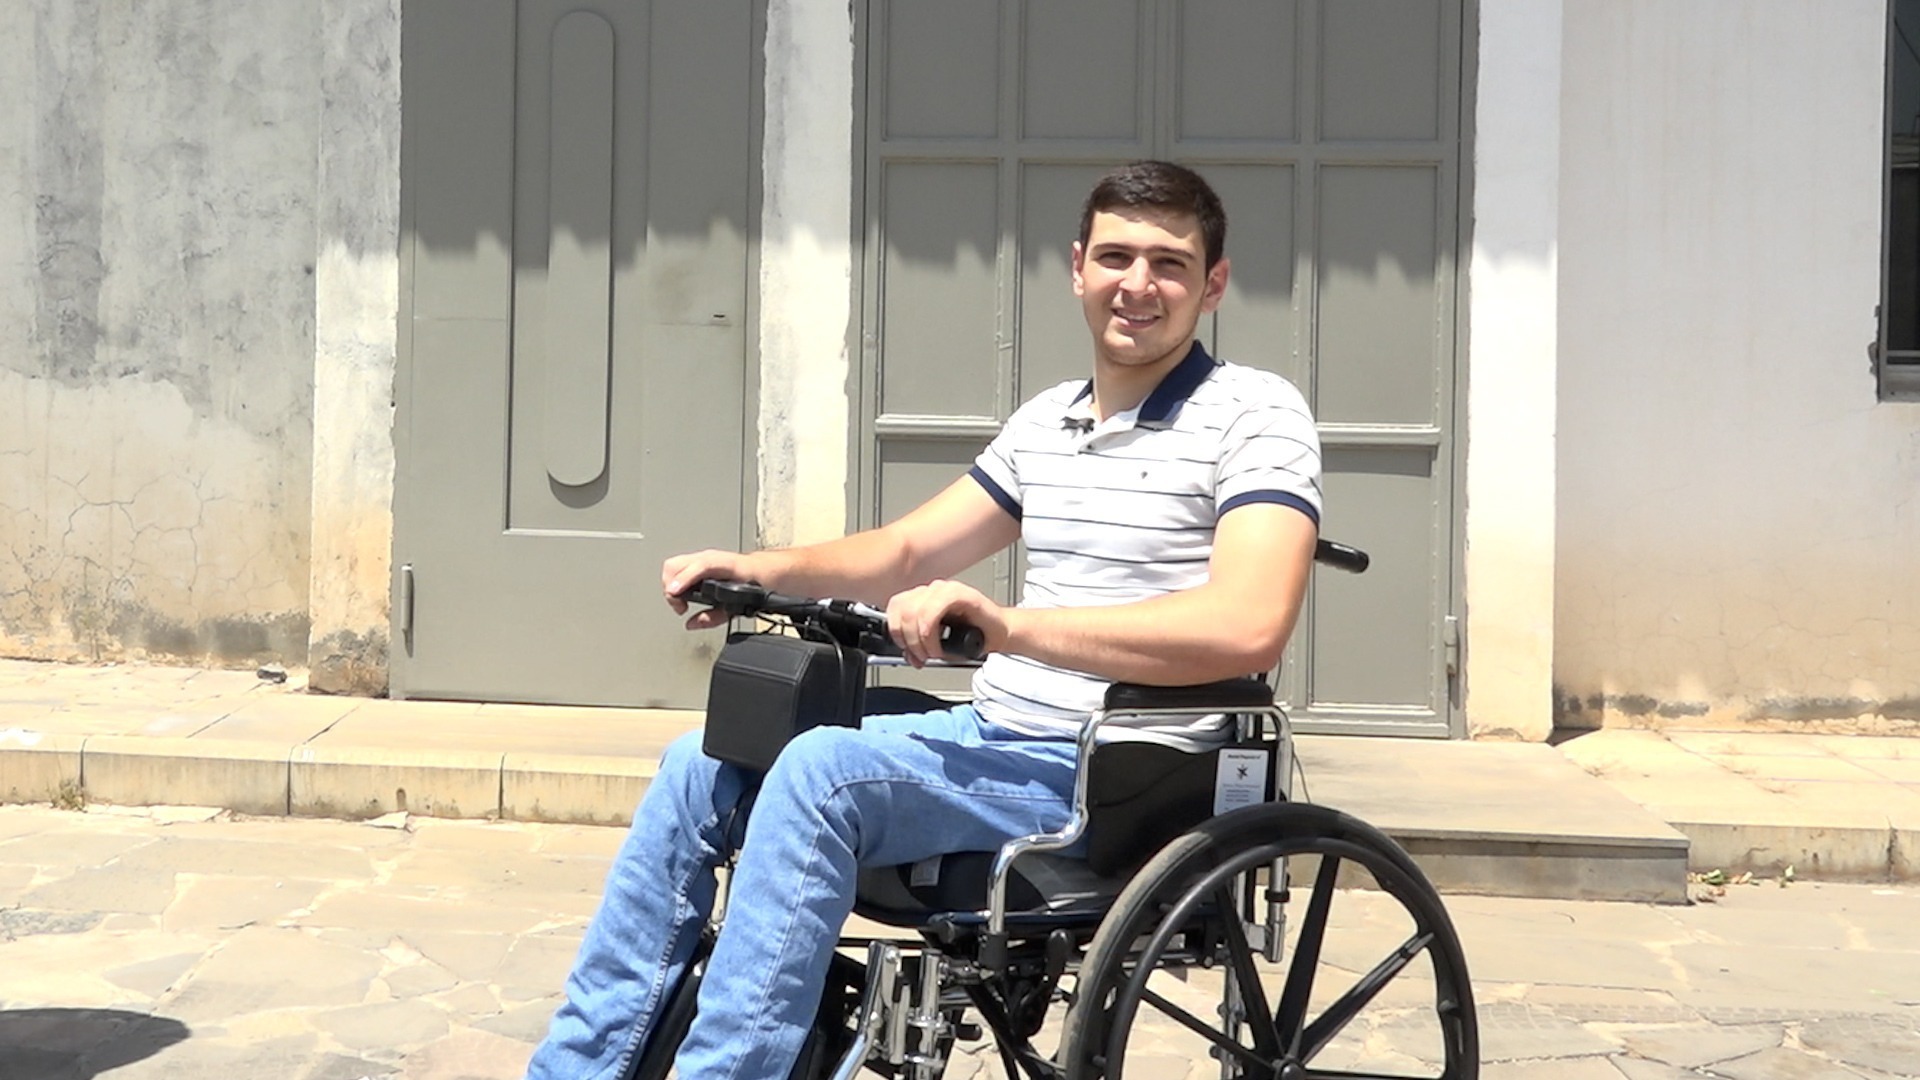 New Equipment Made in Armenia Helps Injured Soldiers Walk